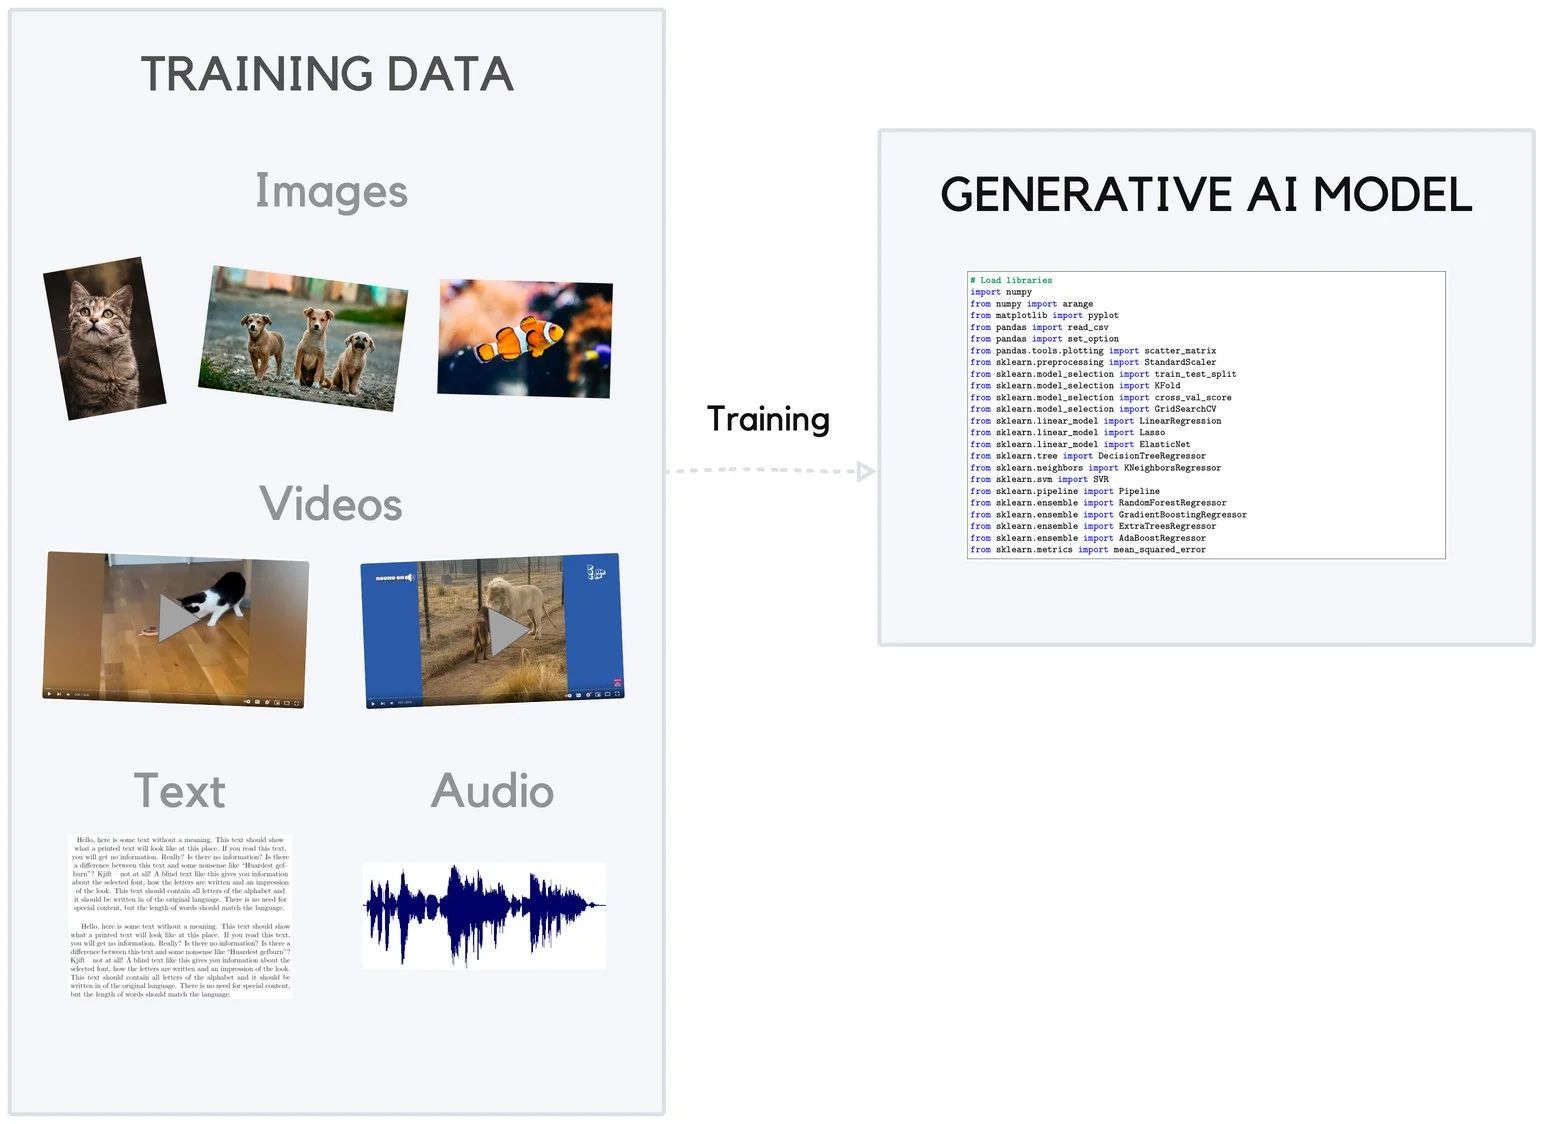 diagram of training data such as images, video, text and audio being used to create a generative AI model